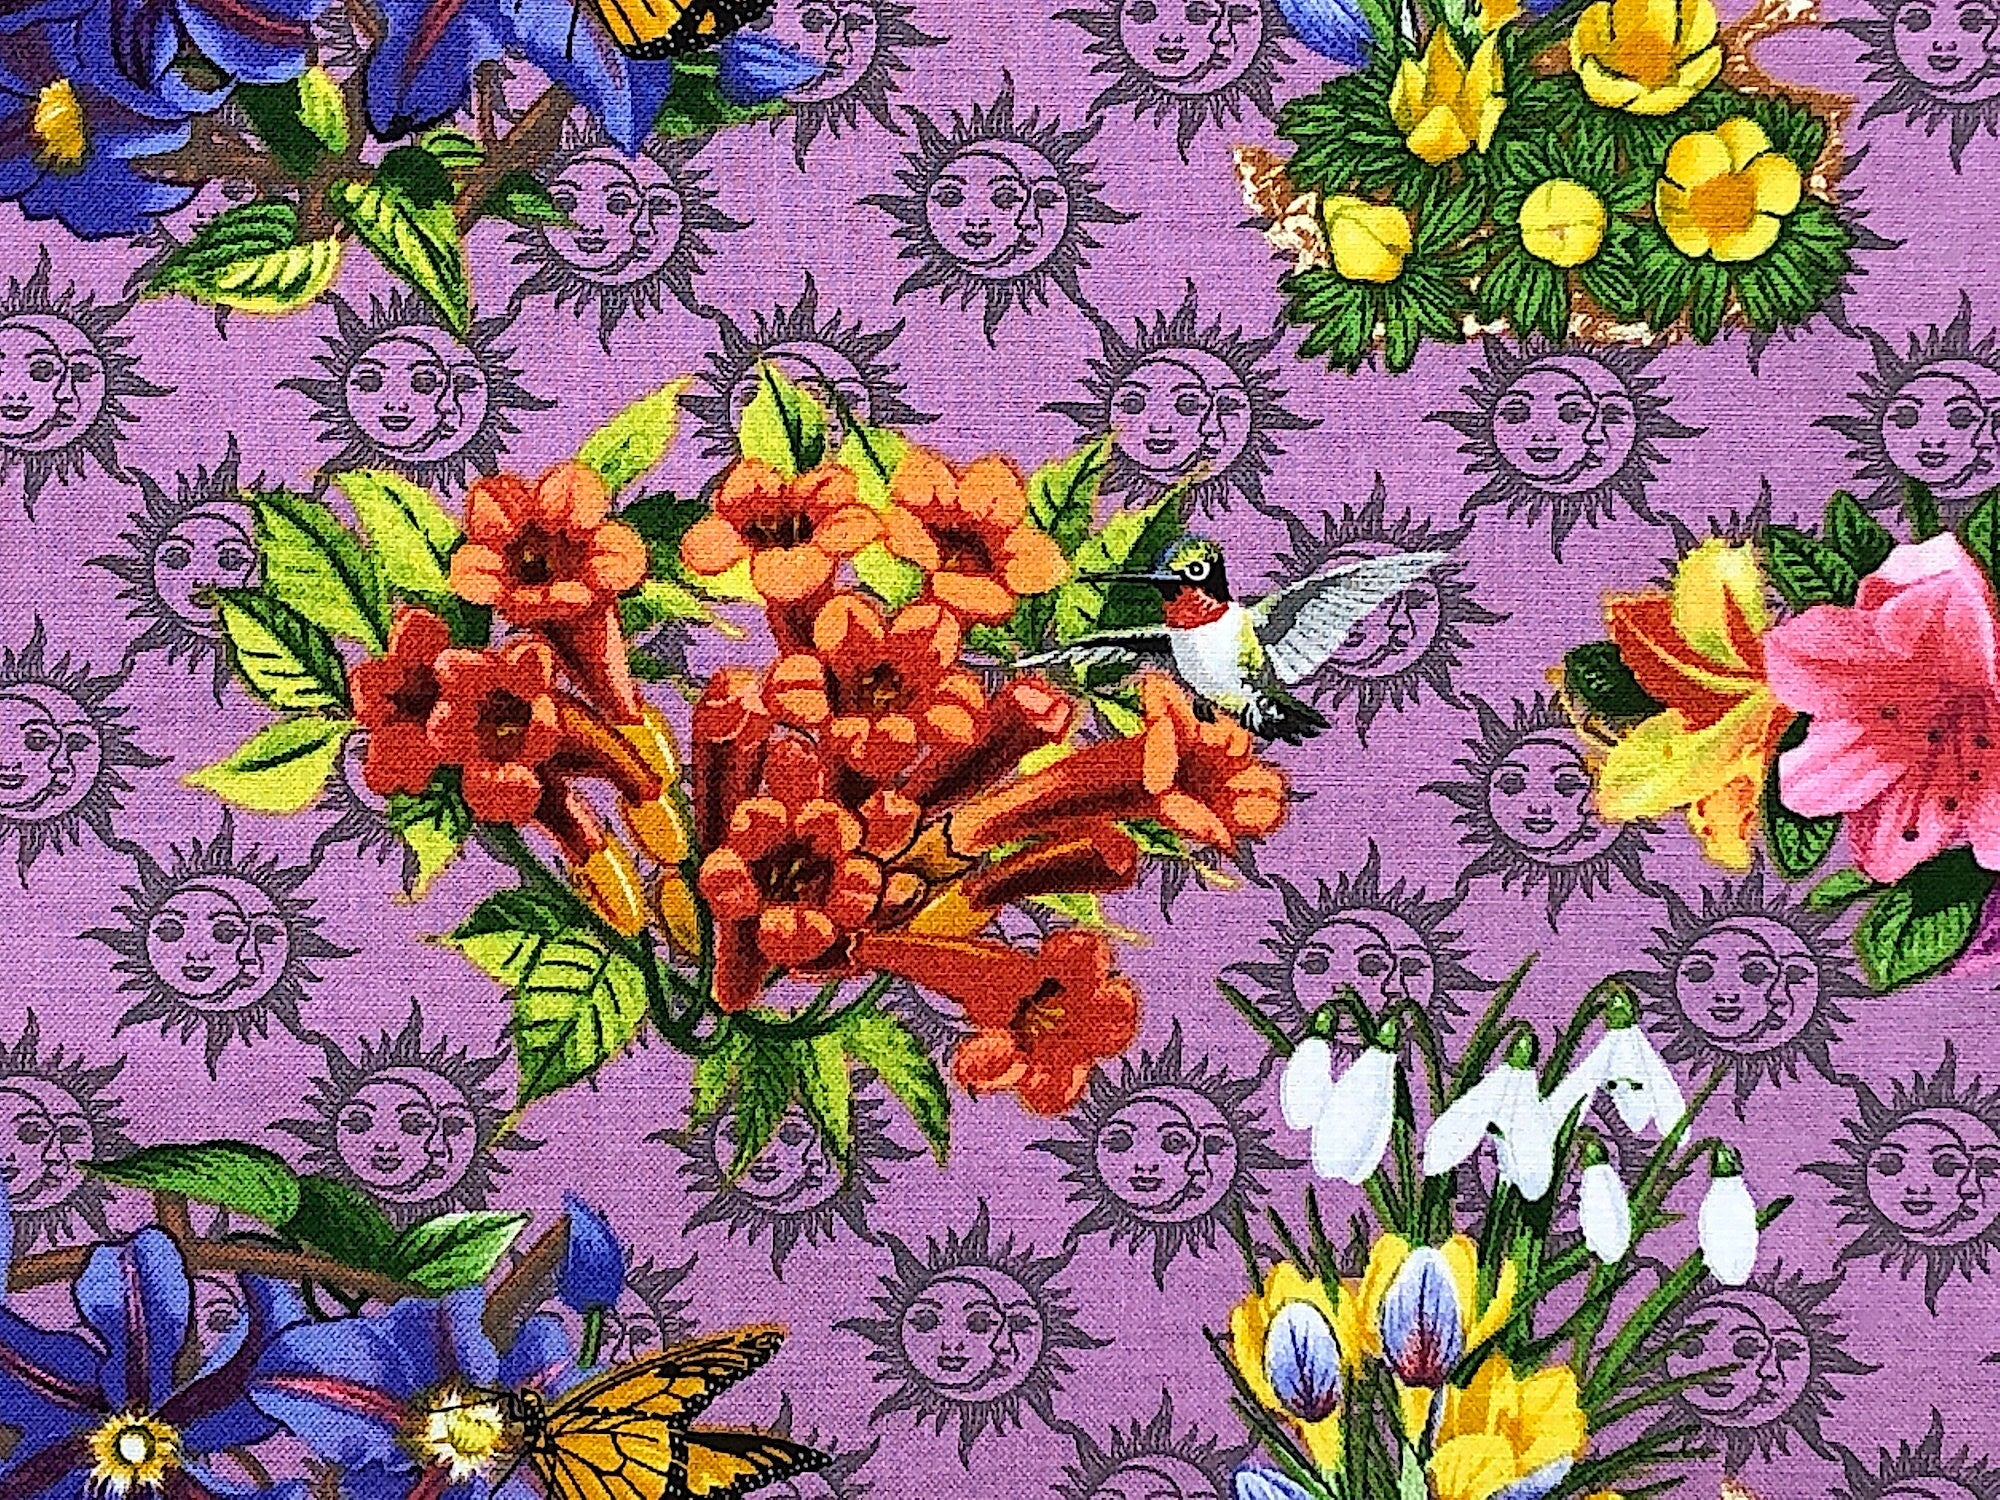 This fabric is called Floral Sundial and is covered with lilies, sunflowers, sun drops, butterflies, hummingbirds and more. This fabric is part of the Old Farmers Almanac collection by Print Concepts.